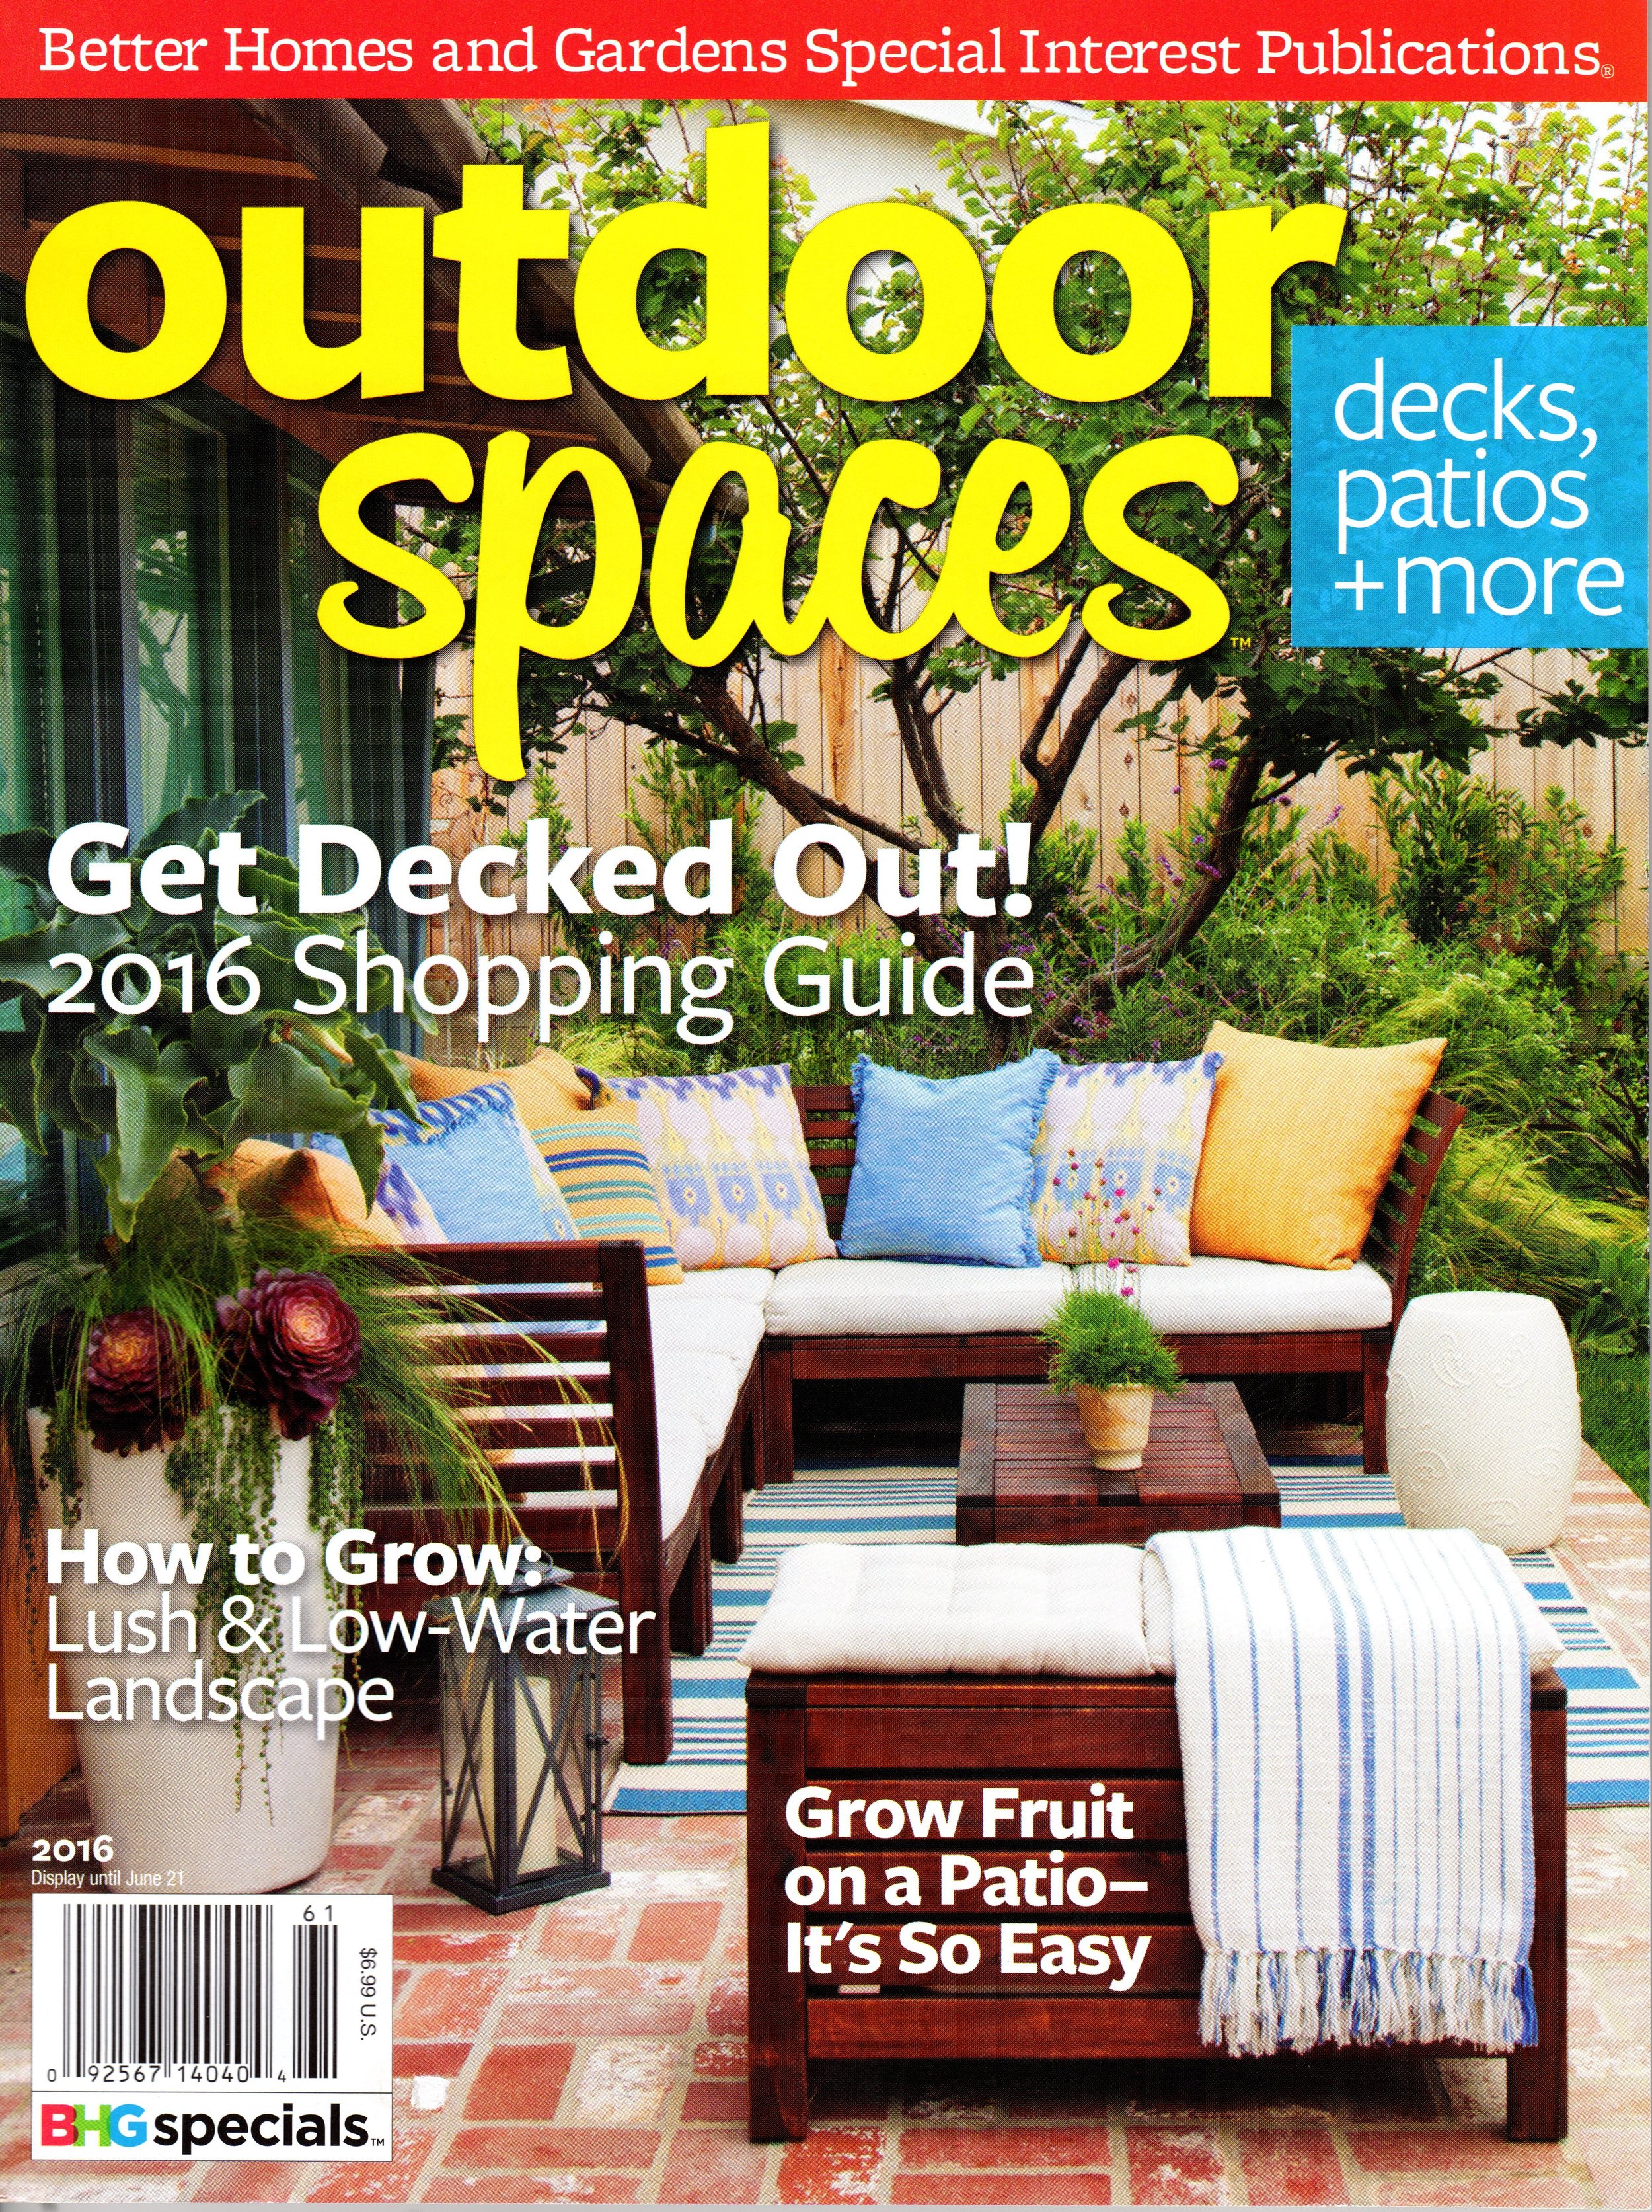 BETTER HOMES AND GARDENS' OUTDOOR SPACES MAGAZINE.. Link to publication imagery